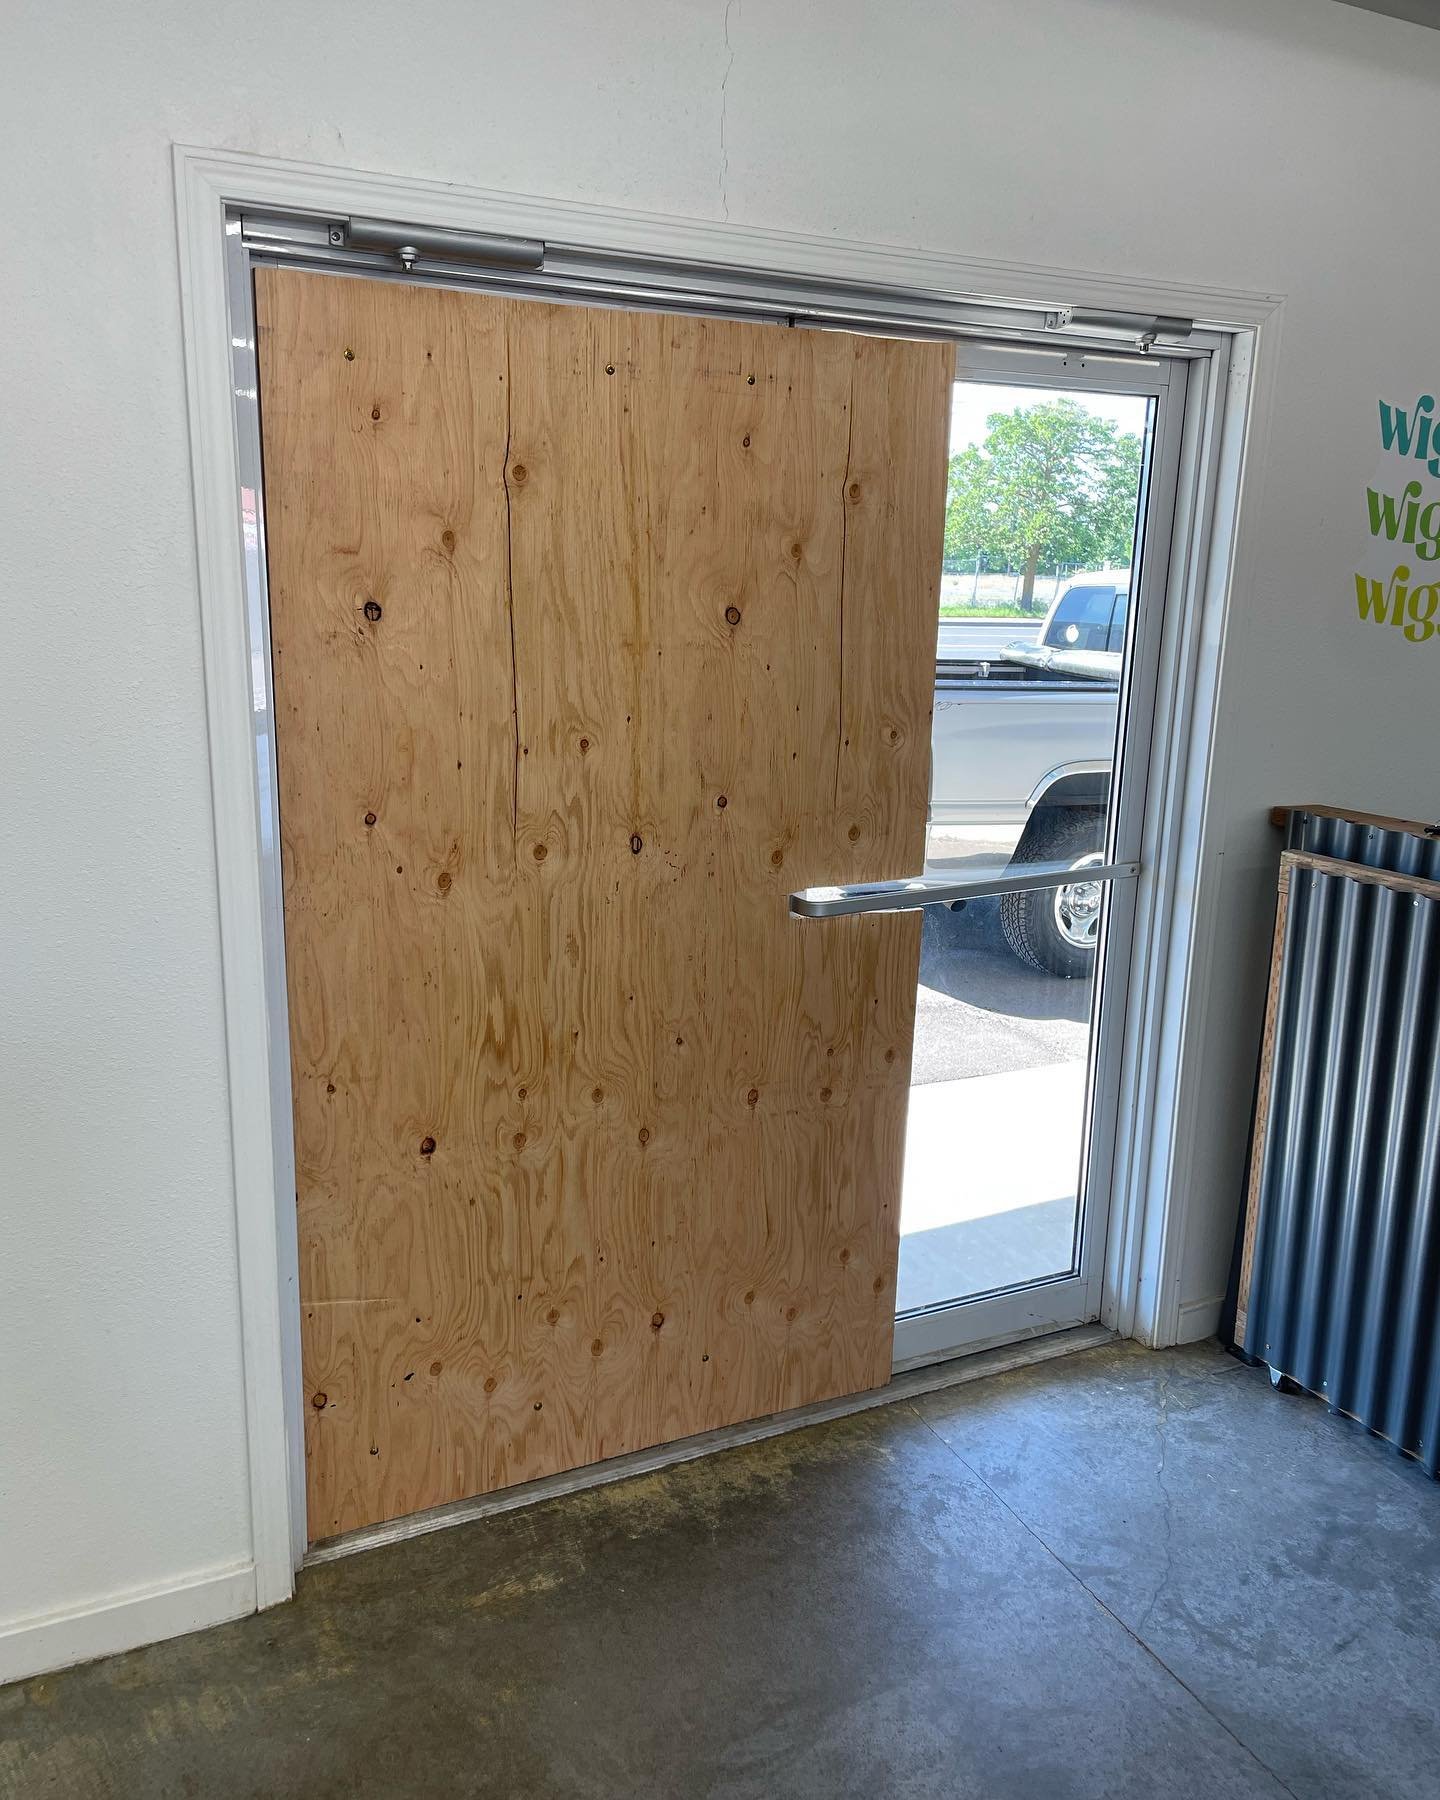 Unfortunately, last night someone decided to chuck a rock through our front door. Thankfully, that&rsquo;s all they did and nothing else was stolen or broken in our facility. We have swept, shopvacced, and mopped thoroughly to clear out all the glass